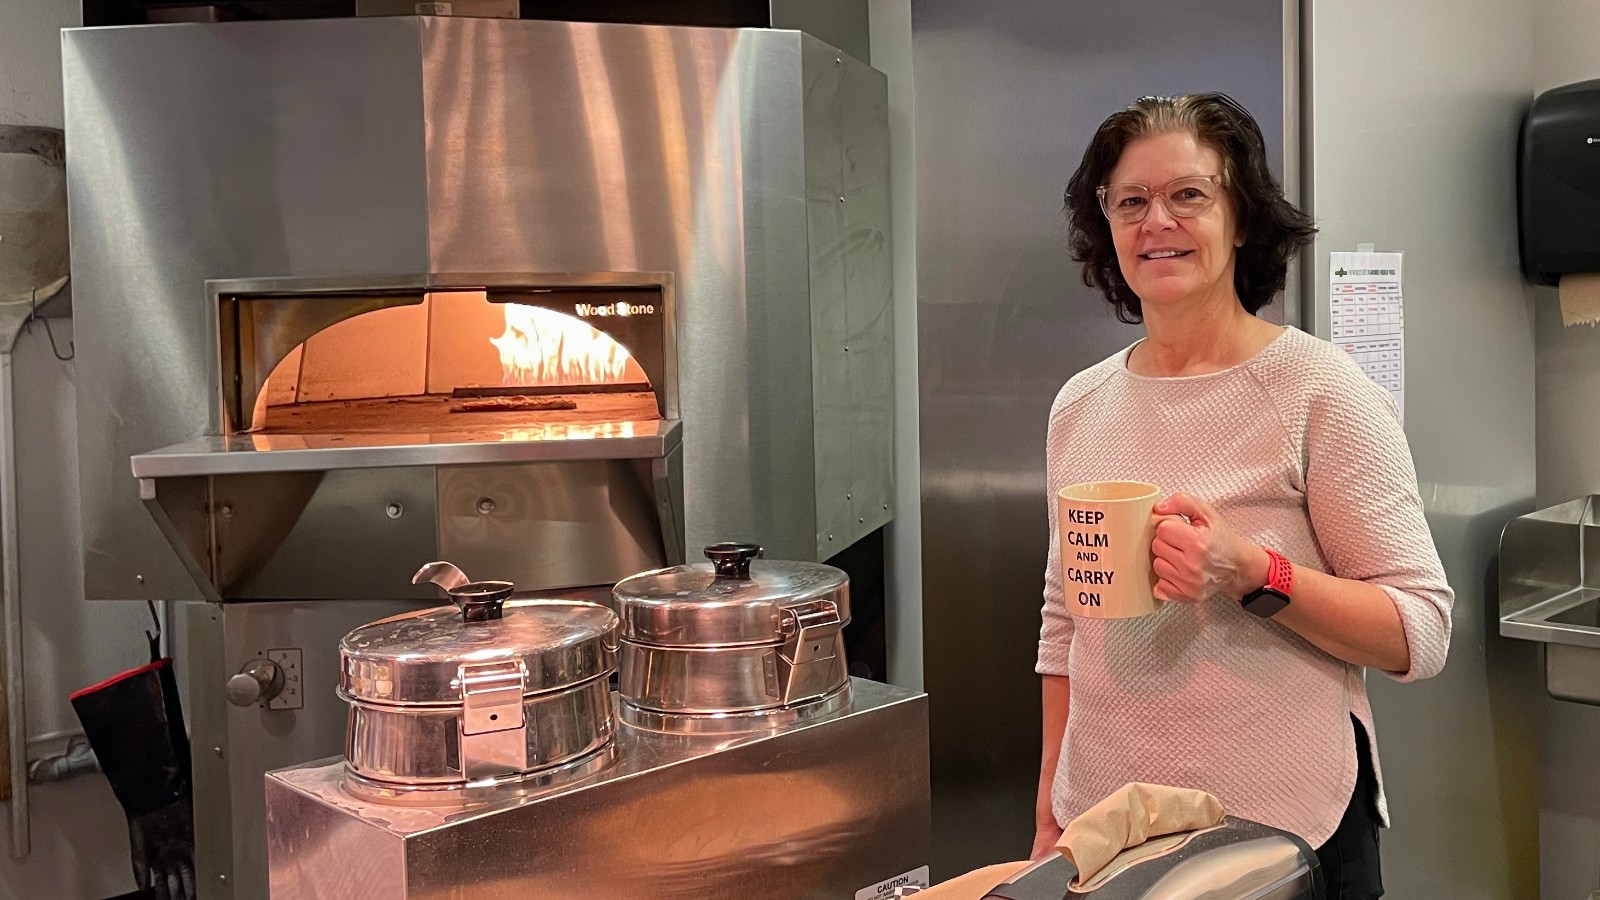 Nursing professor Gail Low and her team have written an online magazine called “Cooking up calm” that boils down their research into easy-to-understand tips to help seniors look after their mental and nutritional health. (Photo: Supplied)